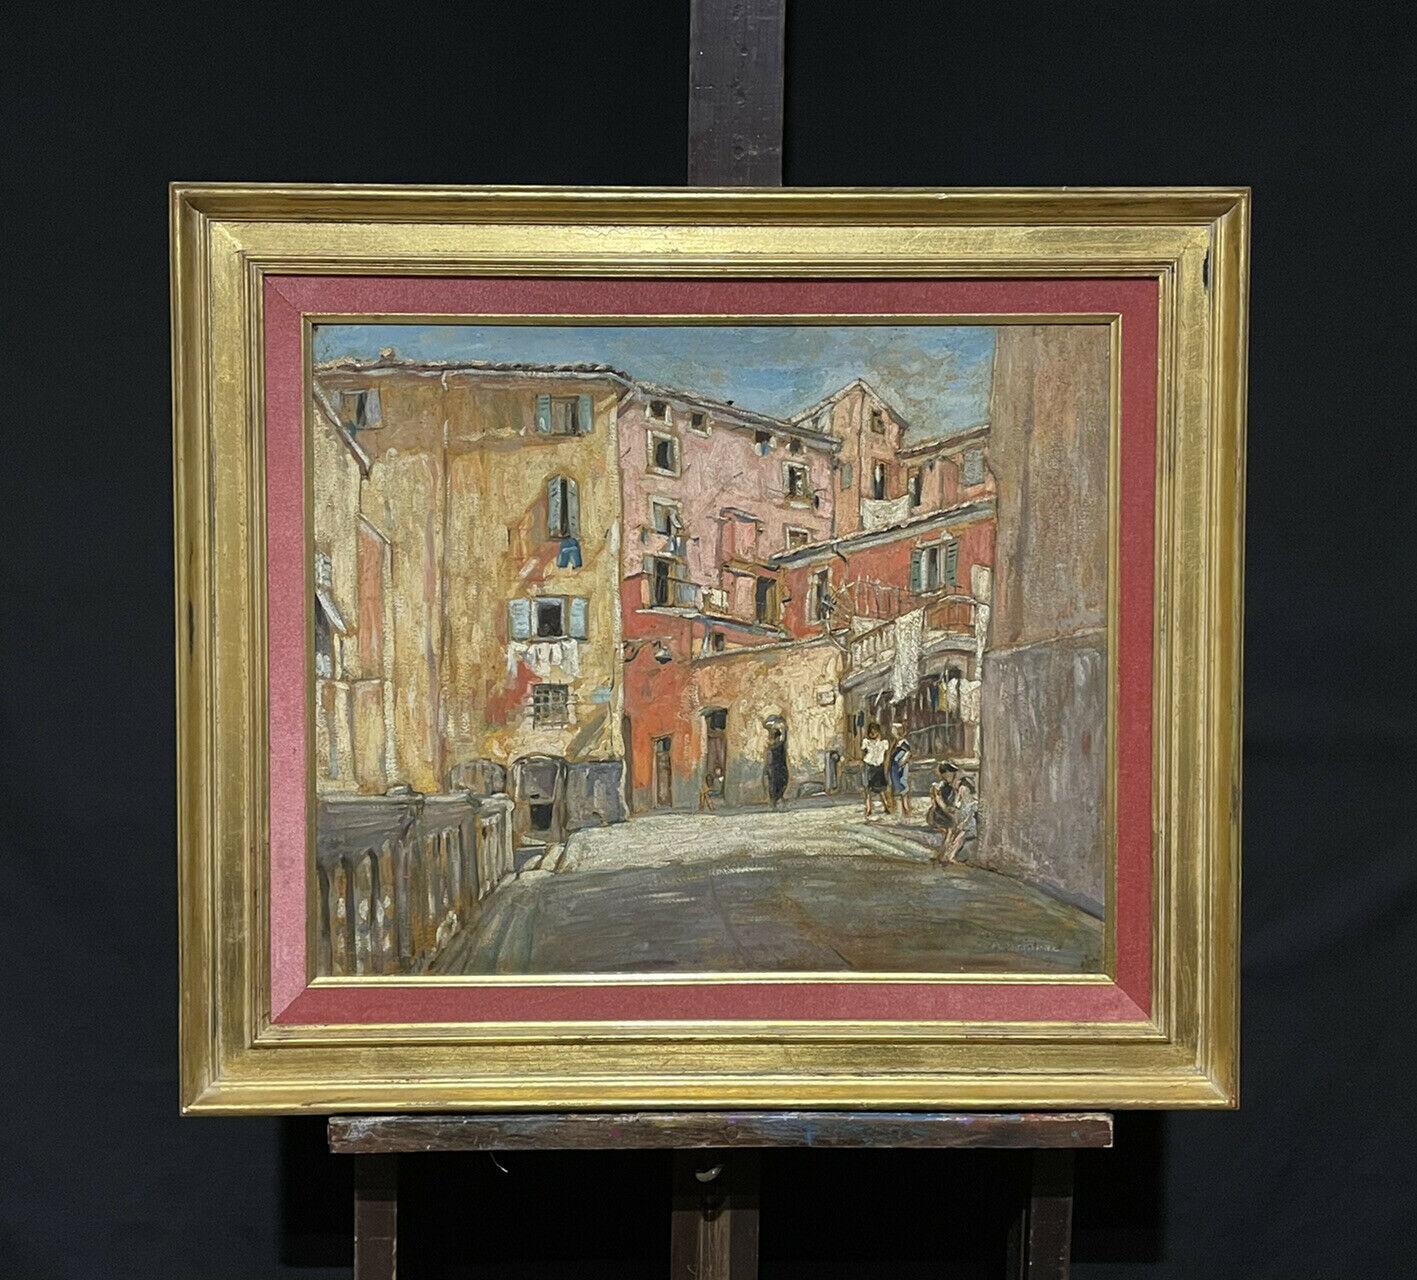 The Old Town Nice, South of France, Signed French Modernist Oil 1930's - Painting by 1930's French